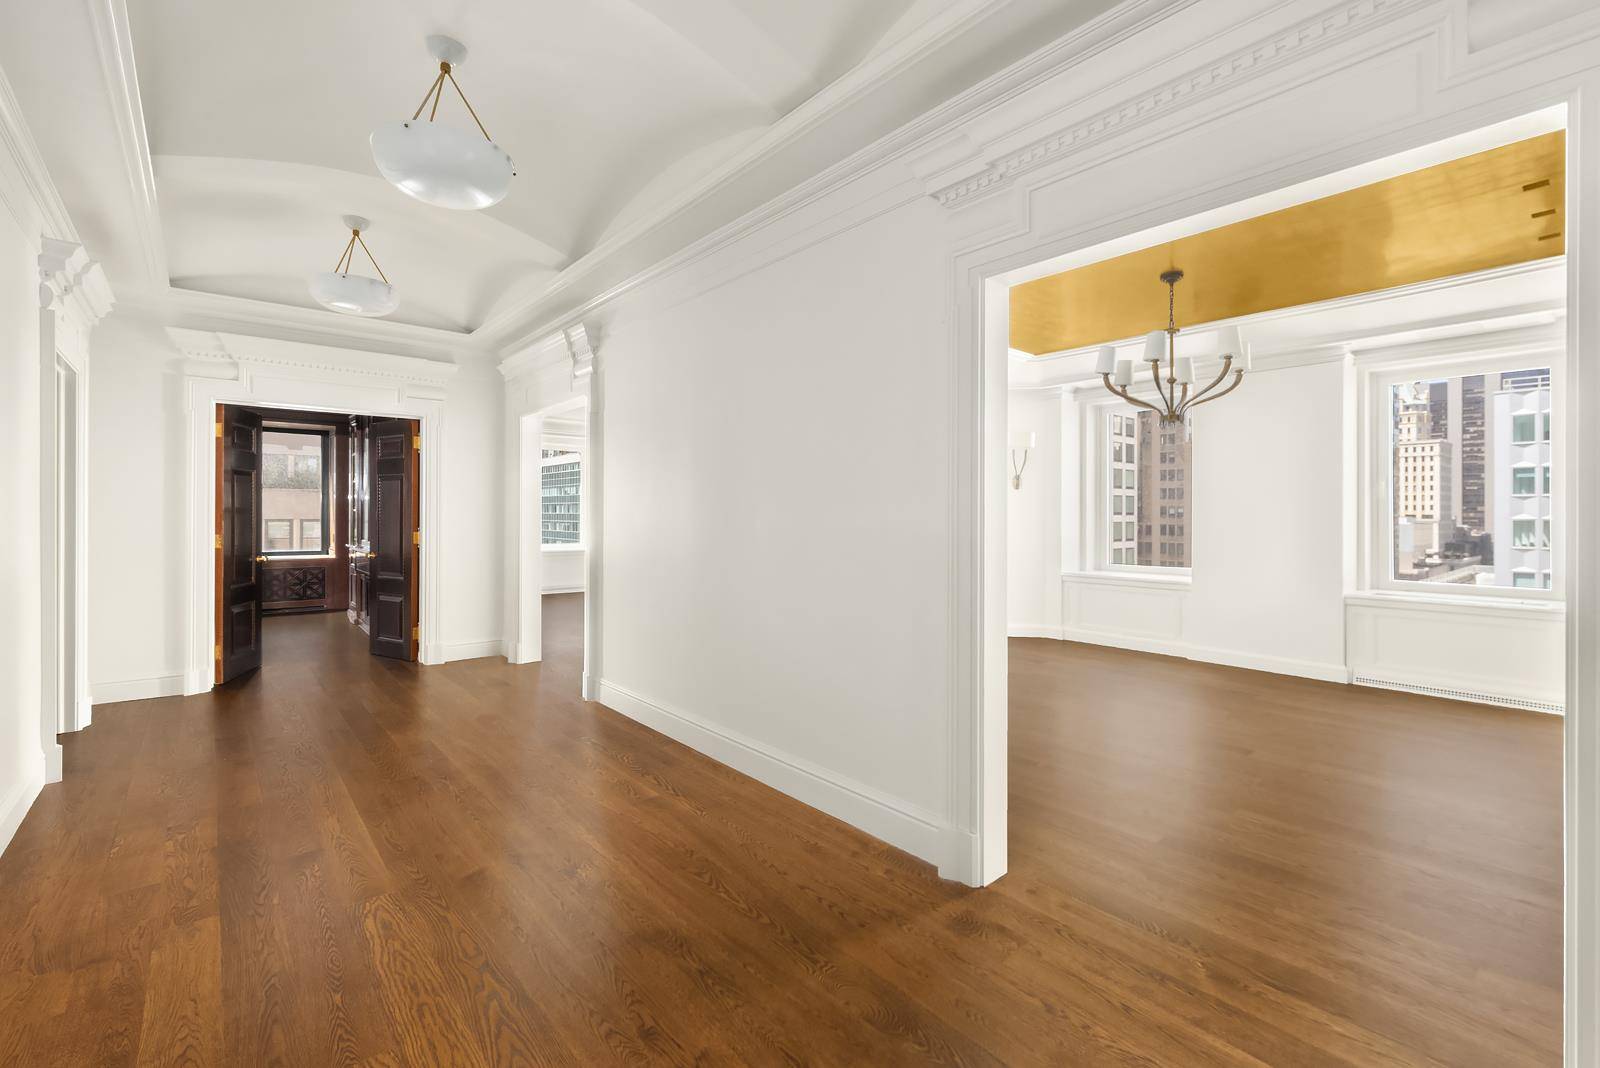 18B is a spacious, grand renovated three bedroom, four marble bathroom corner residence in The Ritz Tower, an historic, stately 42 story former luxury hotel built in 1925 and converted ...